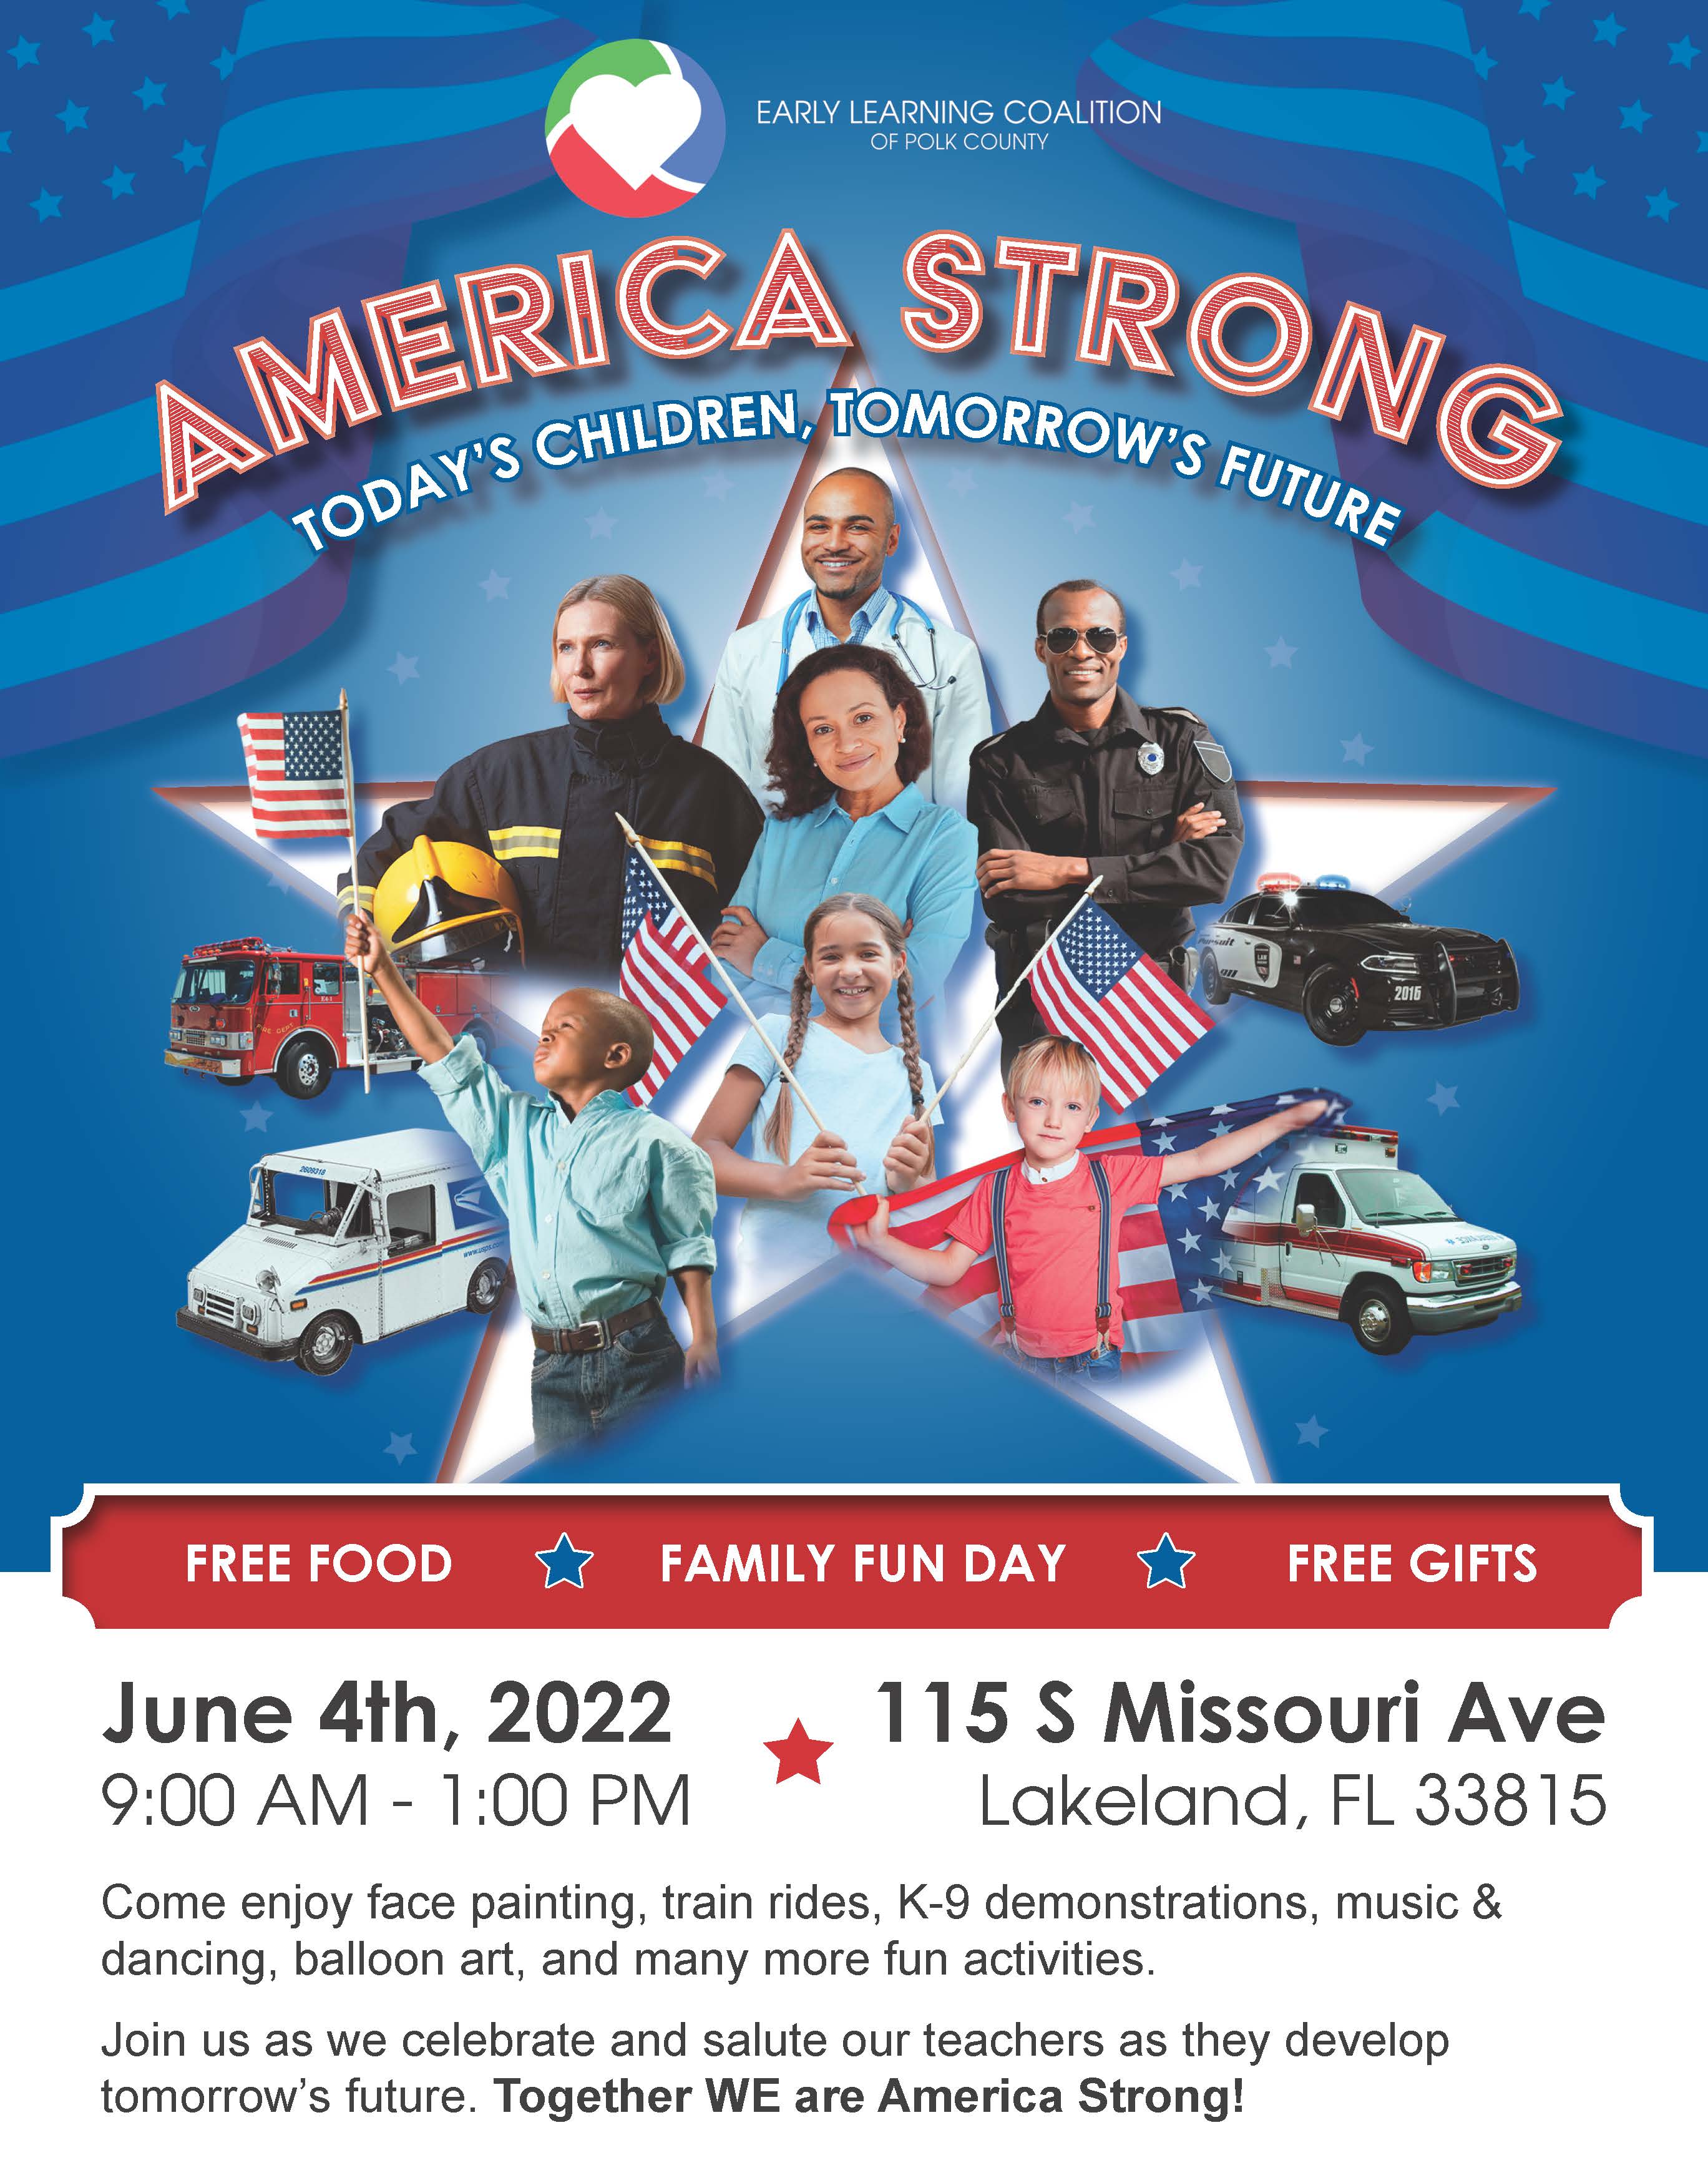 america strong, todays' children, tomorrow's future.free food, family fun day, free gifts, june 4, 9a-1p, 115 s missouri av, face painting, train rides, k9 demos, music, dancing, balloon art and more.  celebrate and salute our teachers as the develop tomorrows futire.  together we are america strong.